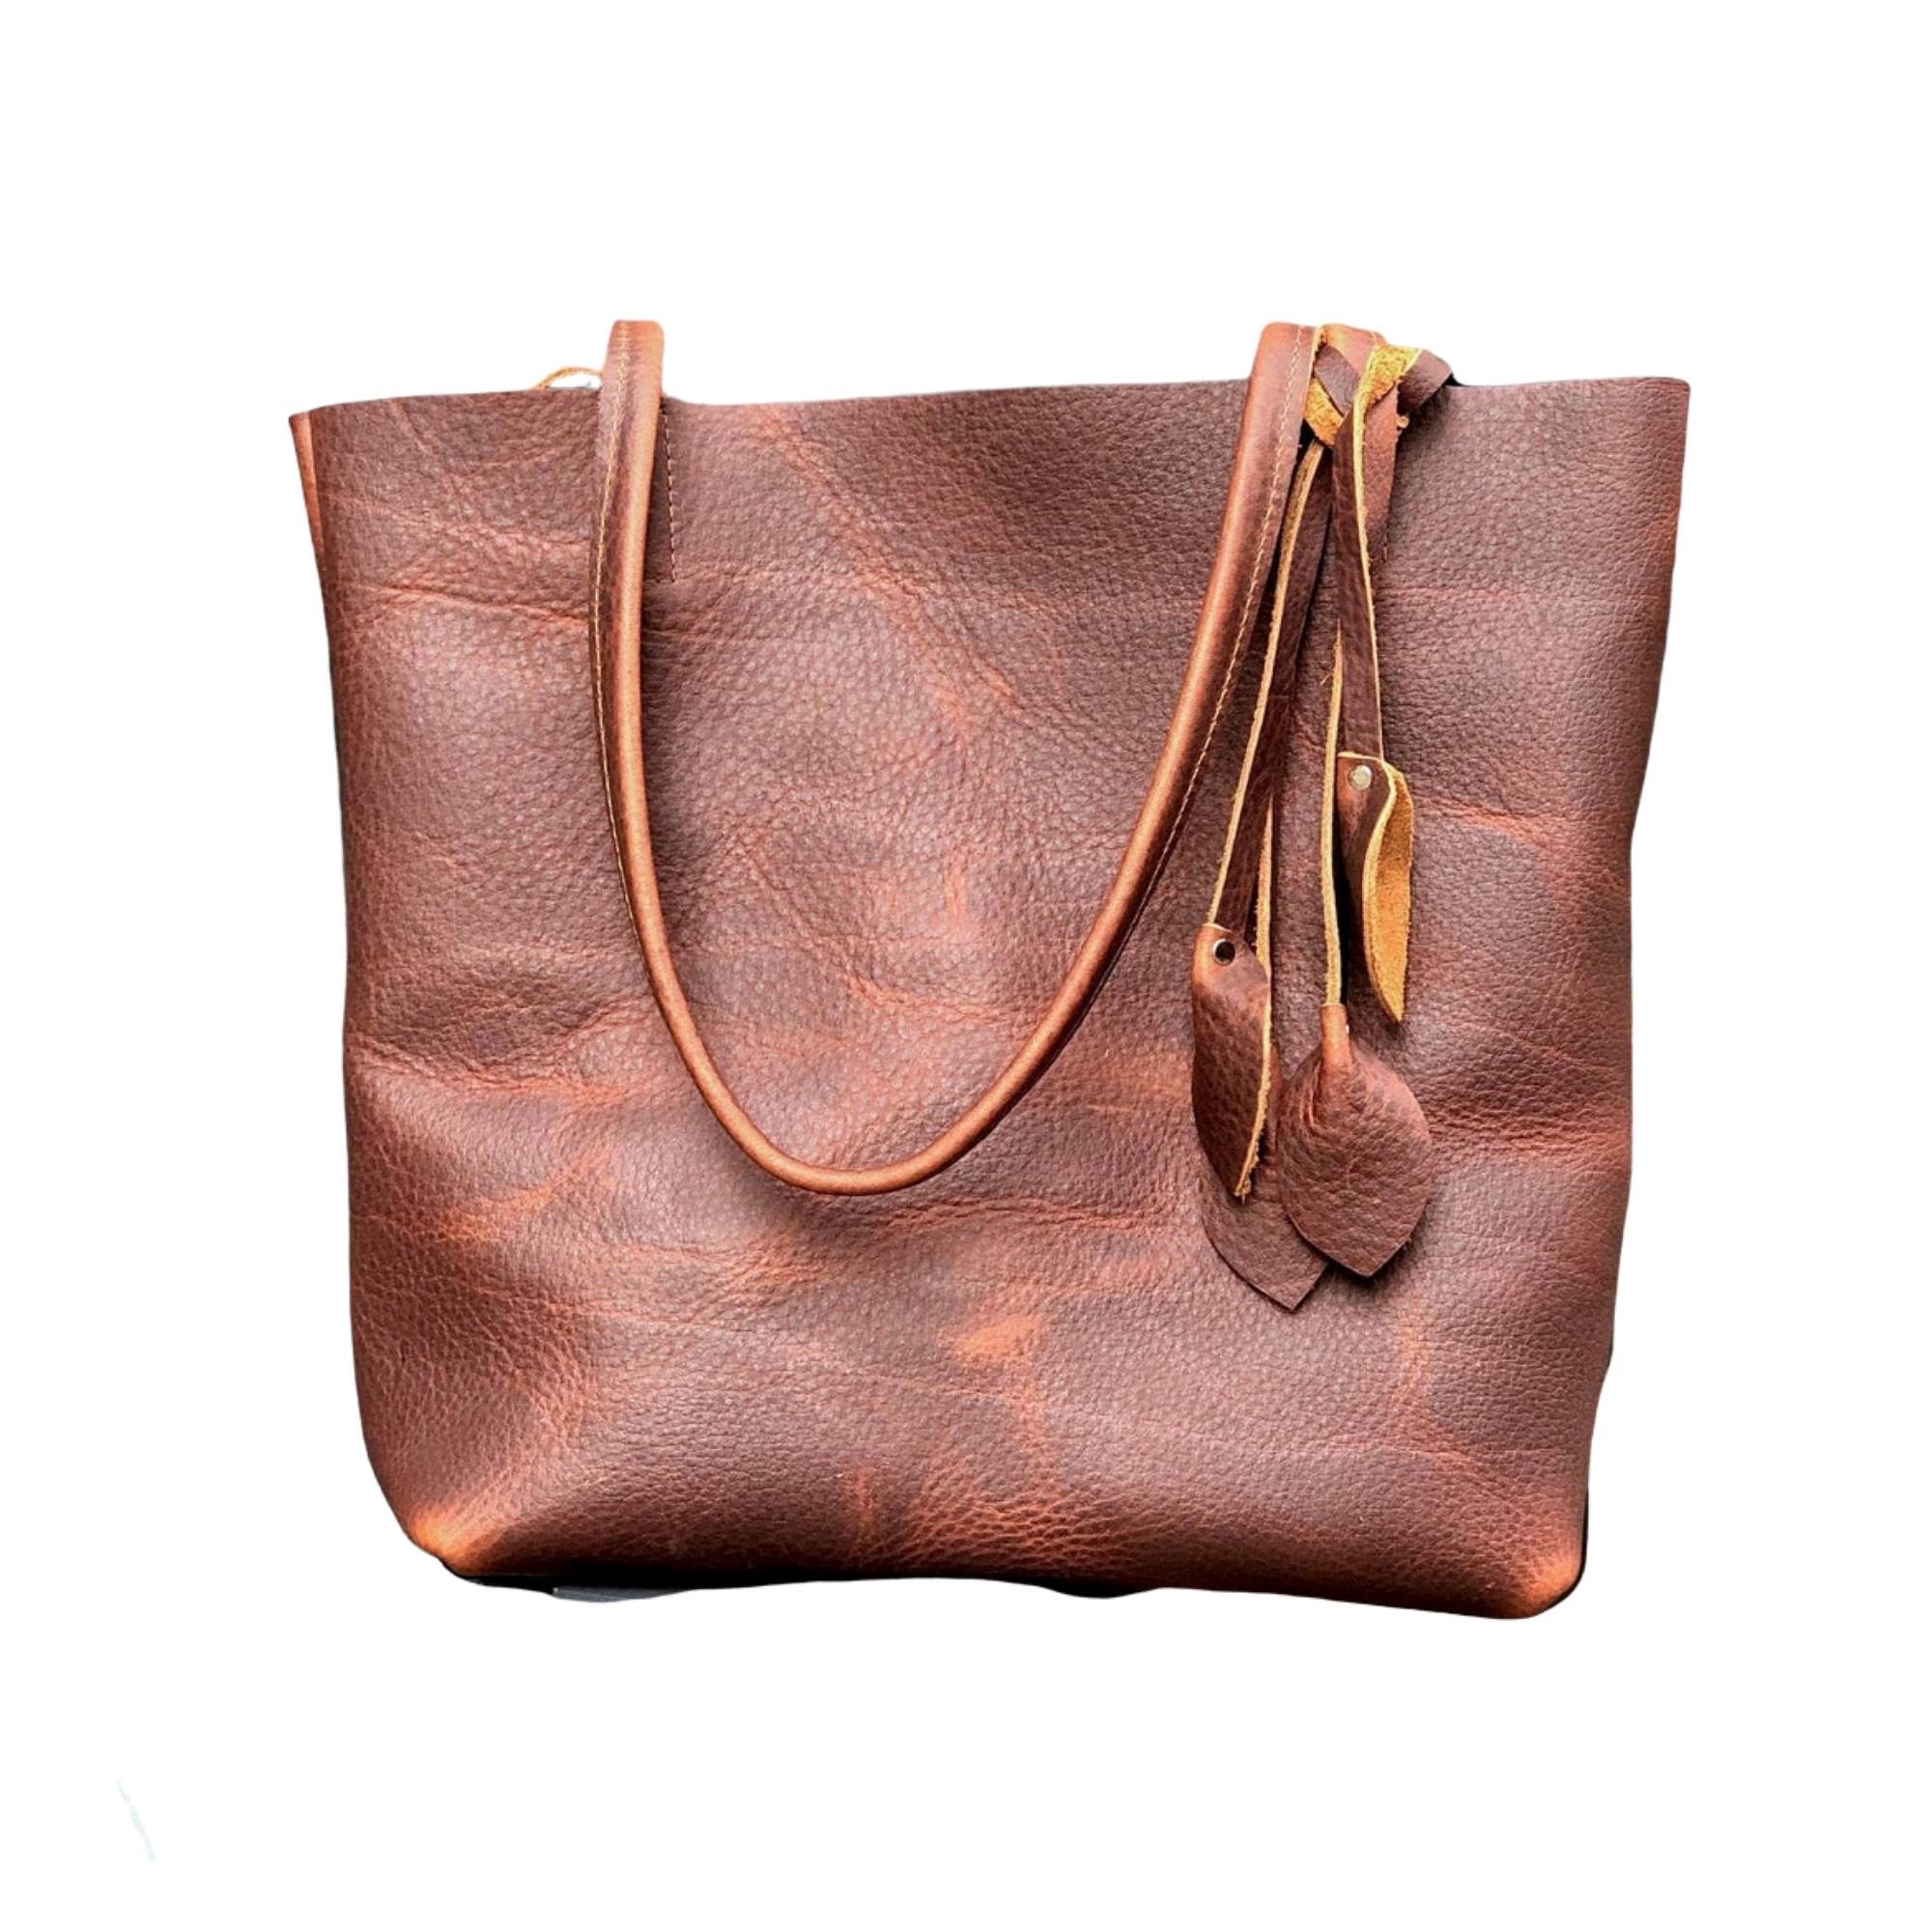 Extra large brown leather tote bag 24”x 15” – Urban Artisan Boutique